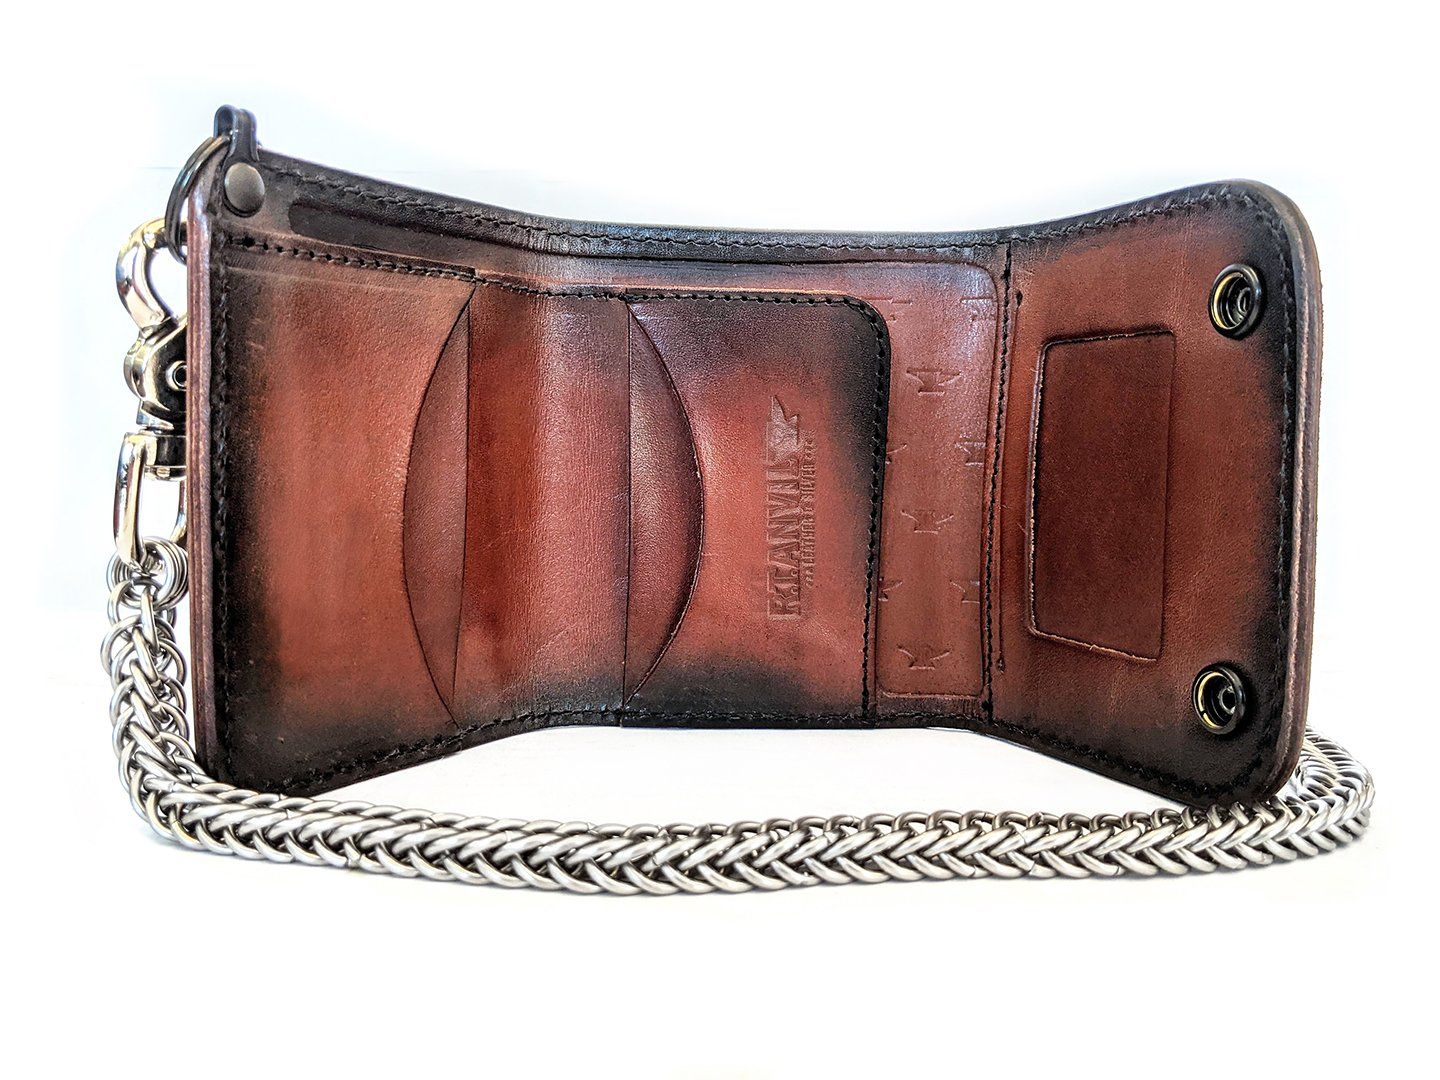 Chain and Strap Wallets Collection for Women